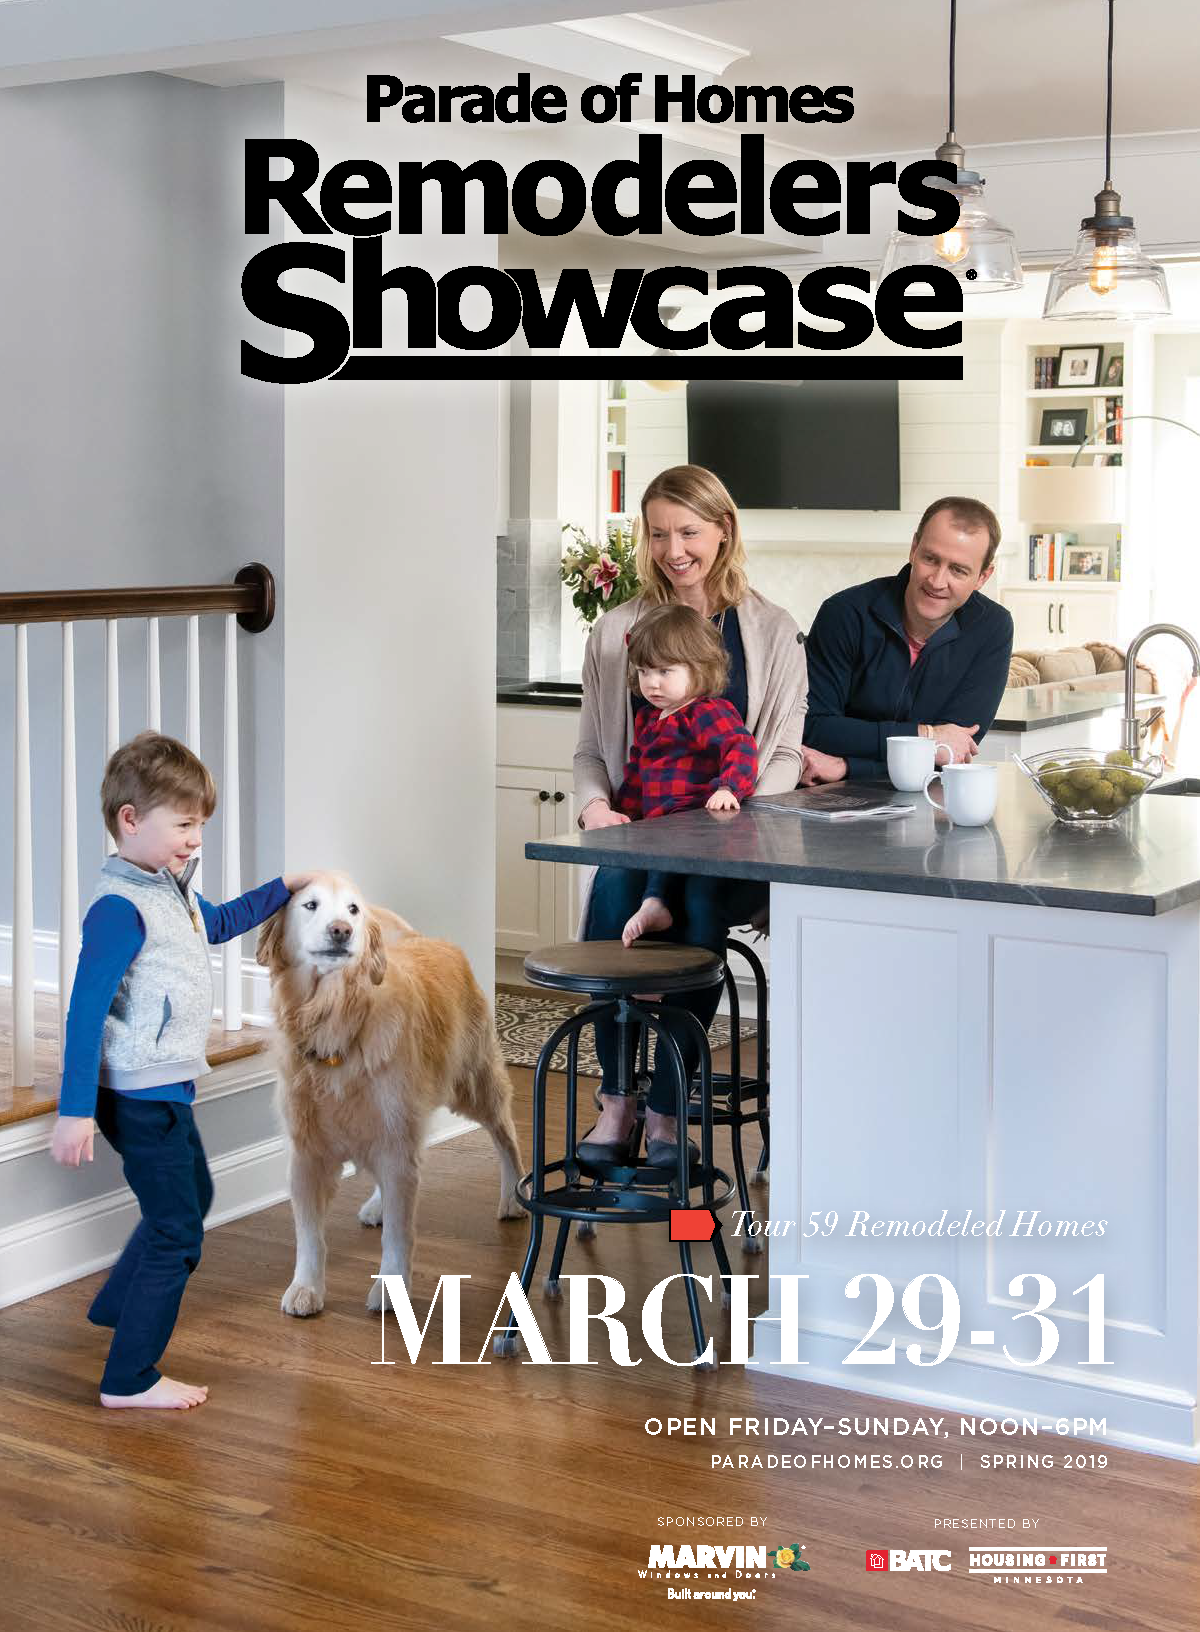 Image for Spring Parade of Homes Remodelers Showcase® Opens March 29-31